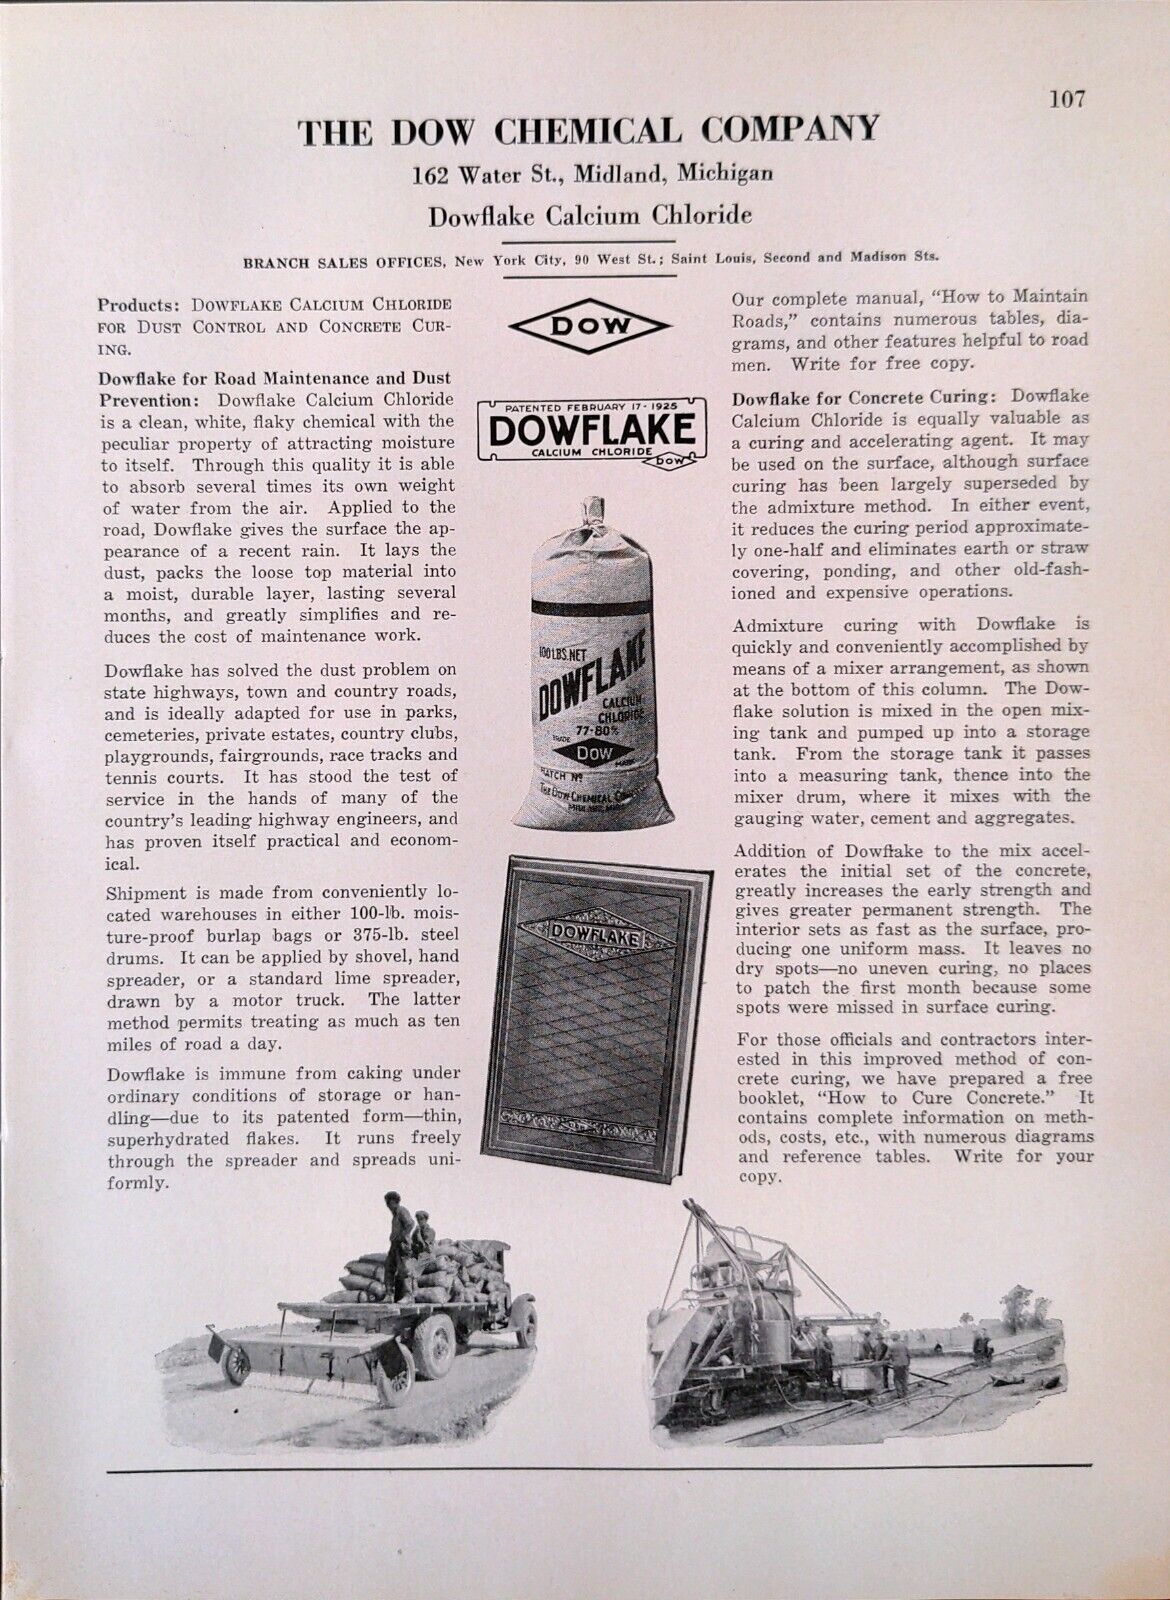 1928 Dow Chemical Print Ad Dowflake Calcium Chloride Concrete Curing